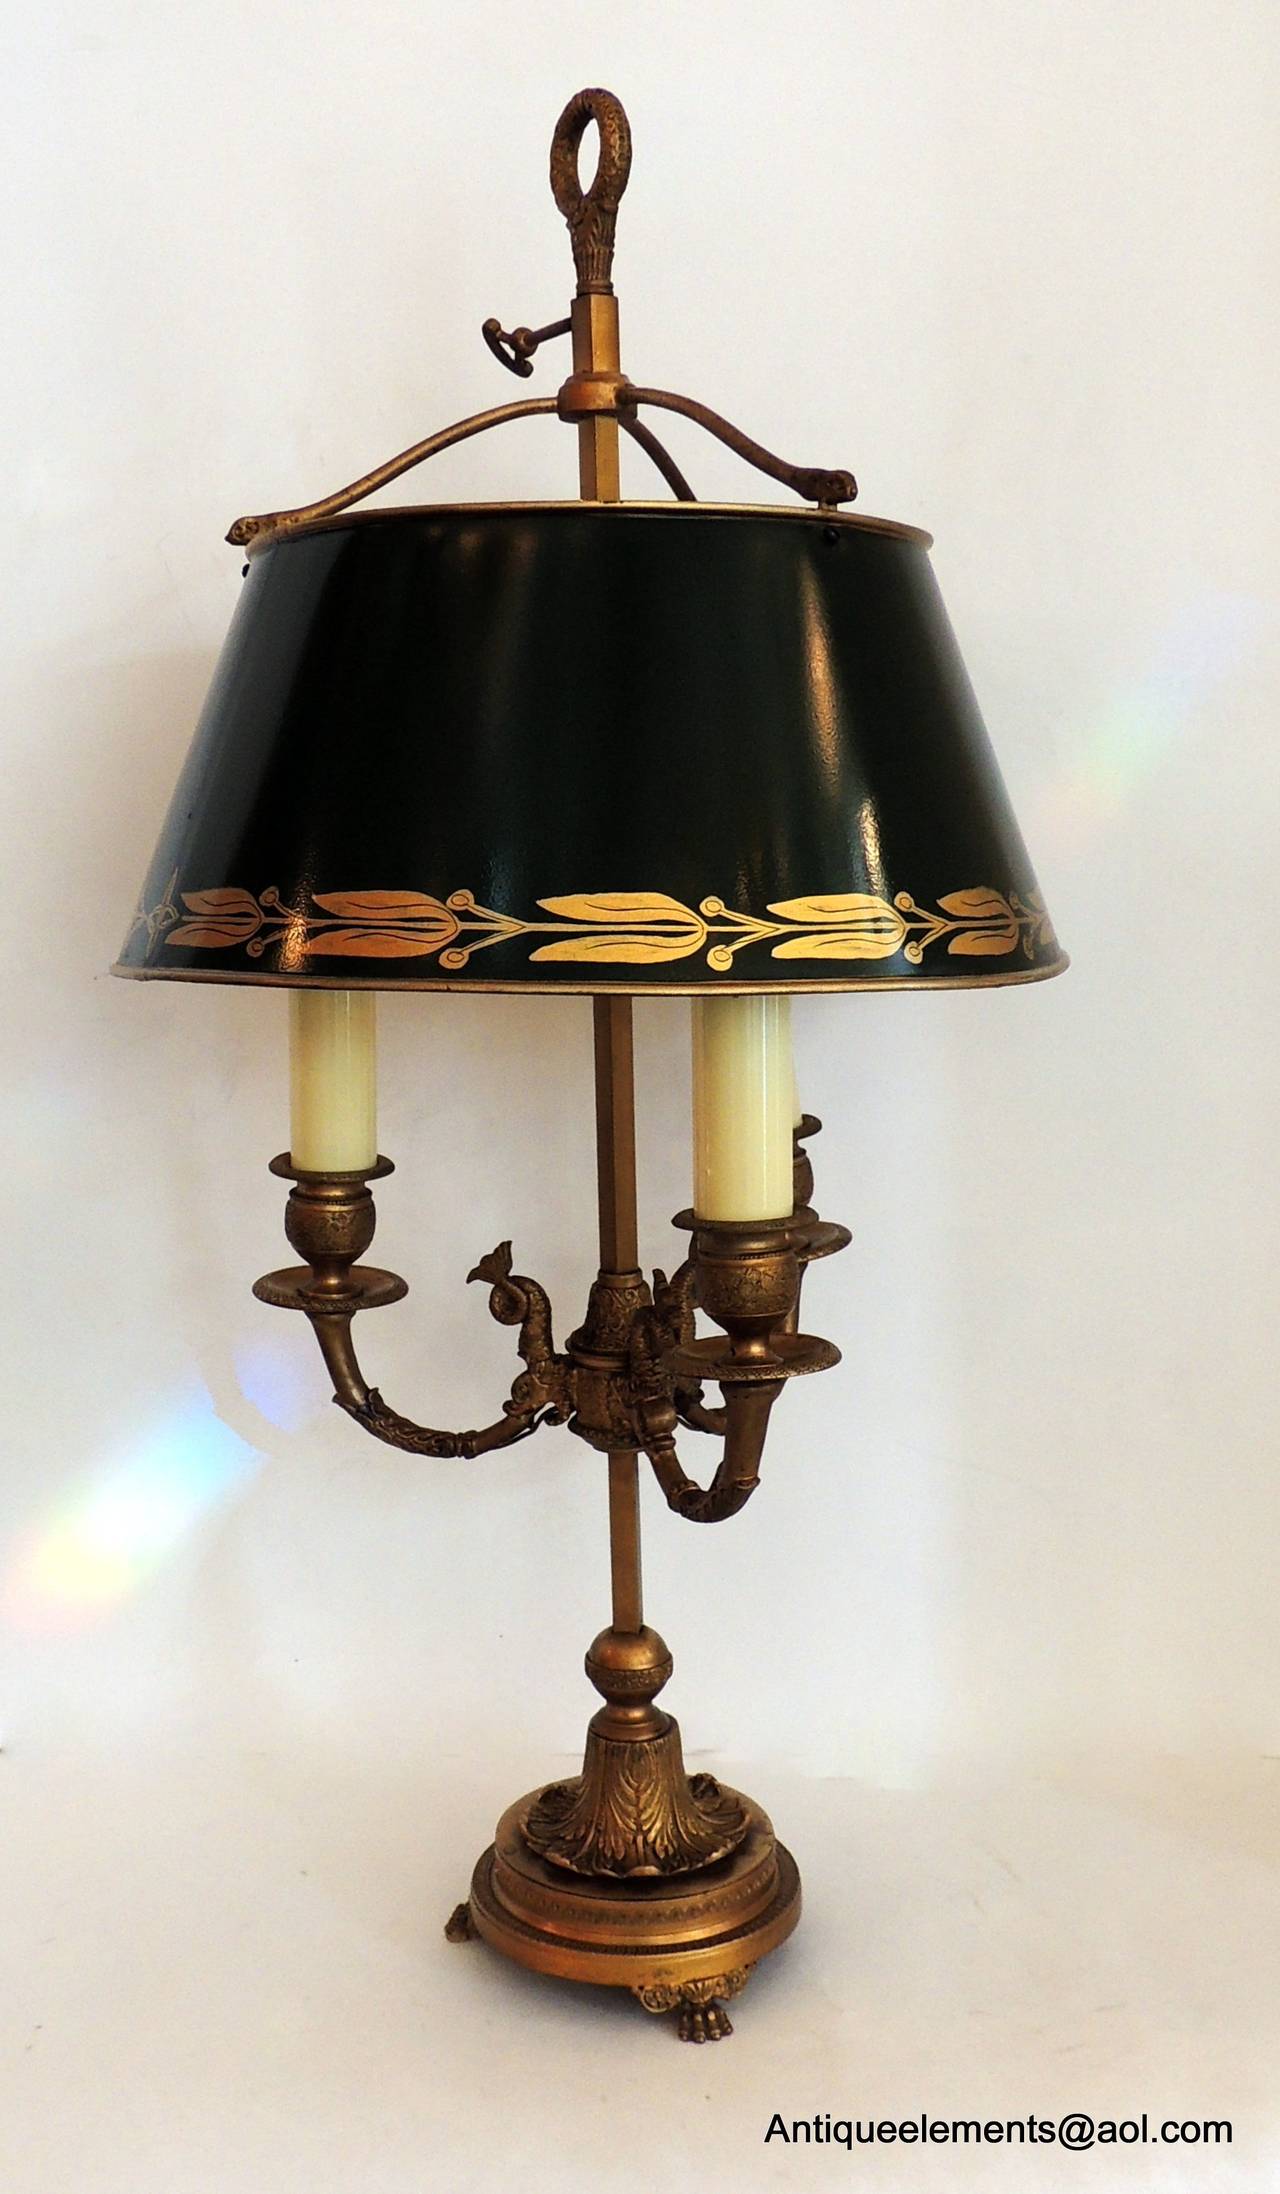 This vintage French pair of hand-painted green three-light Bouillotte lamps
are in wonderful condition. The incredible gilt bronze detailed engraving on the base carries up to the sea creatures whose tails wraparound the candle arms. The engraving